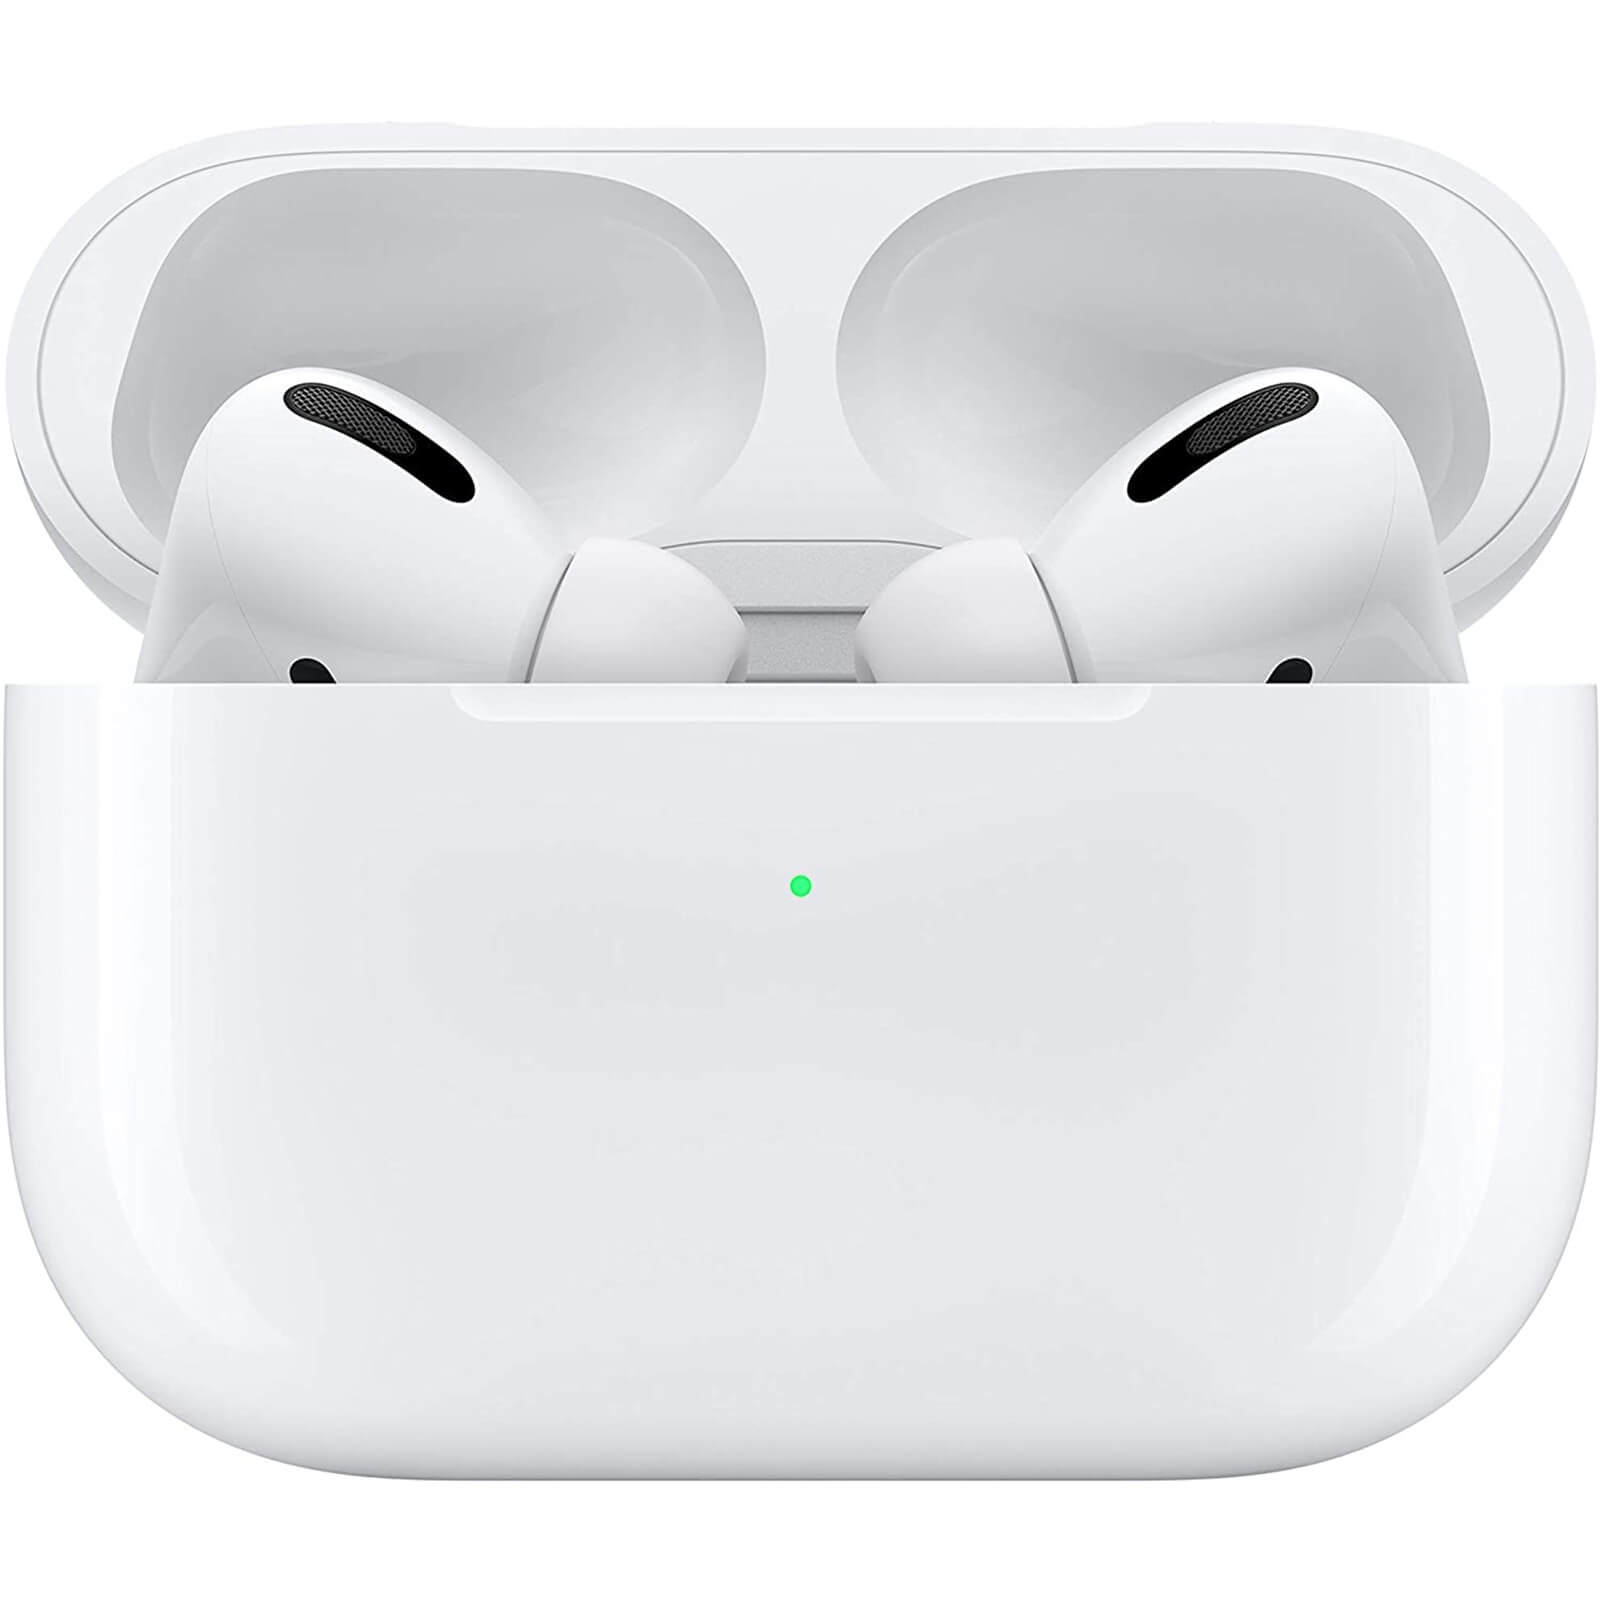 AirPods Pro with Magsafe Charging Case